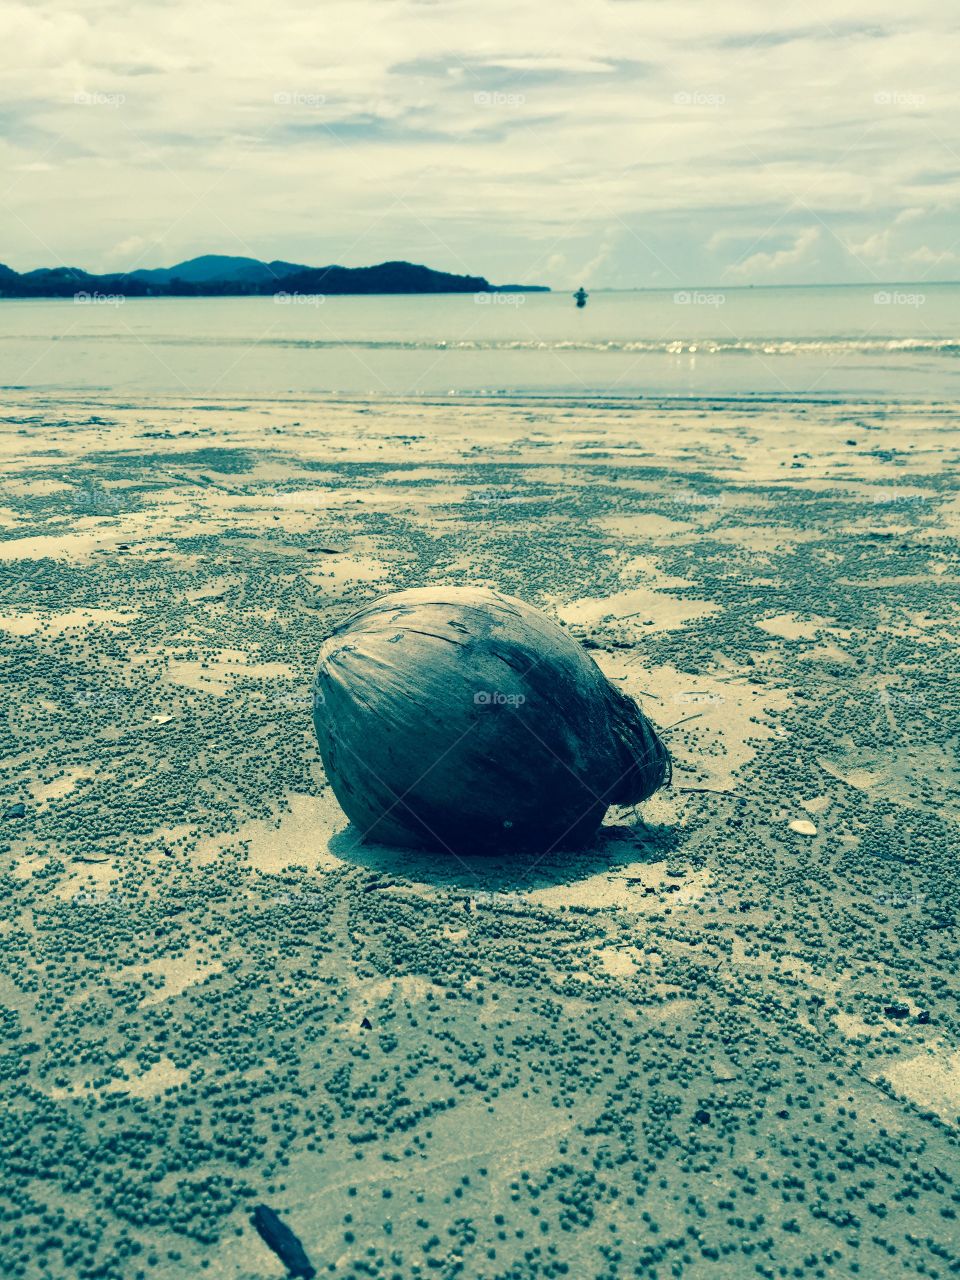 Coconut by the Sea . Saw this coconut lying about on the beach in Ko Lanta, Thailand. Thought it made a nice still life. 